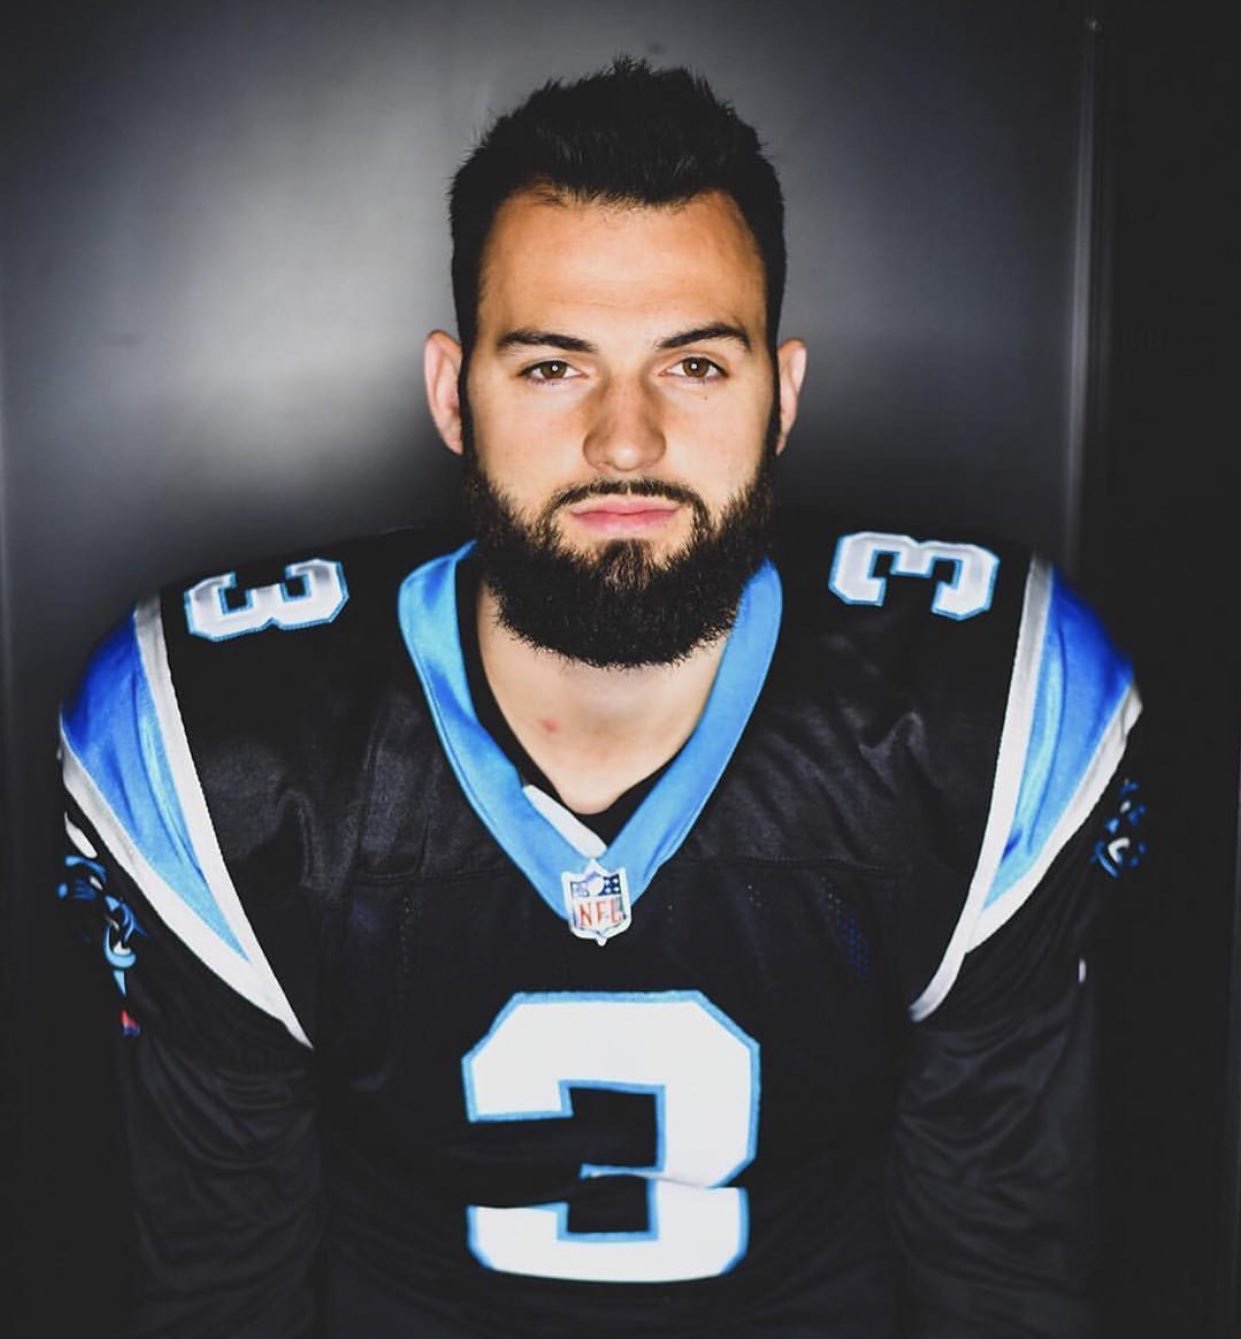 panthers will grier jersey